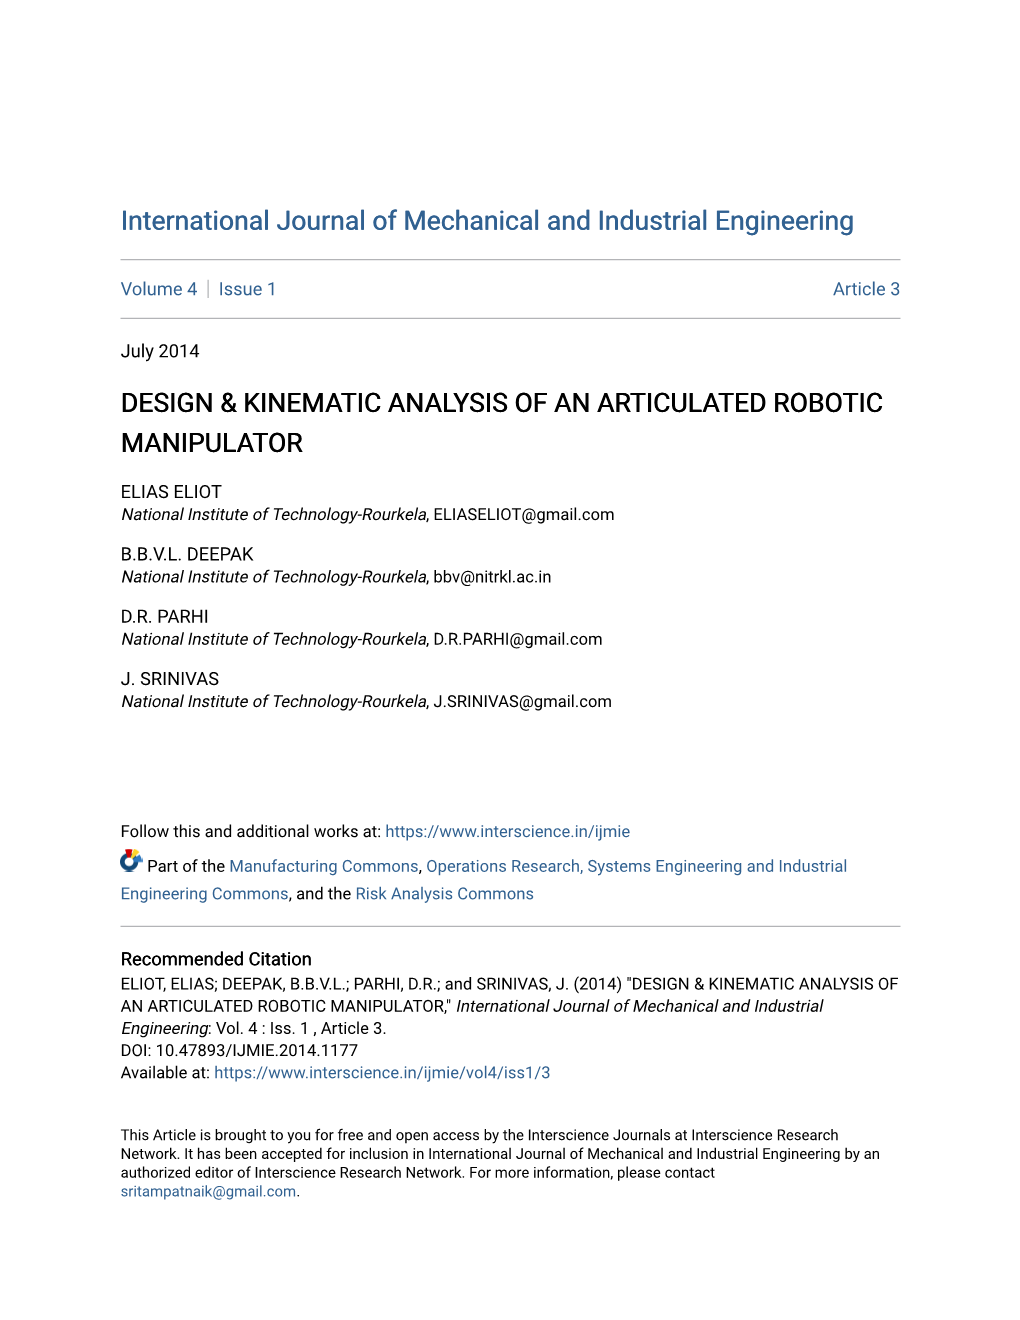 Design & Kinematic Analysis of an Articulated Robotic